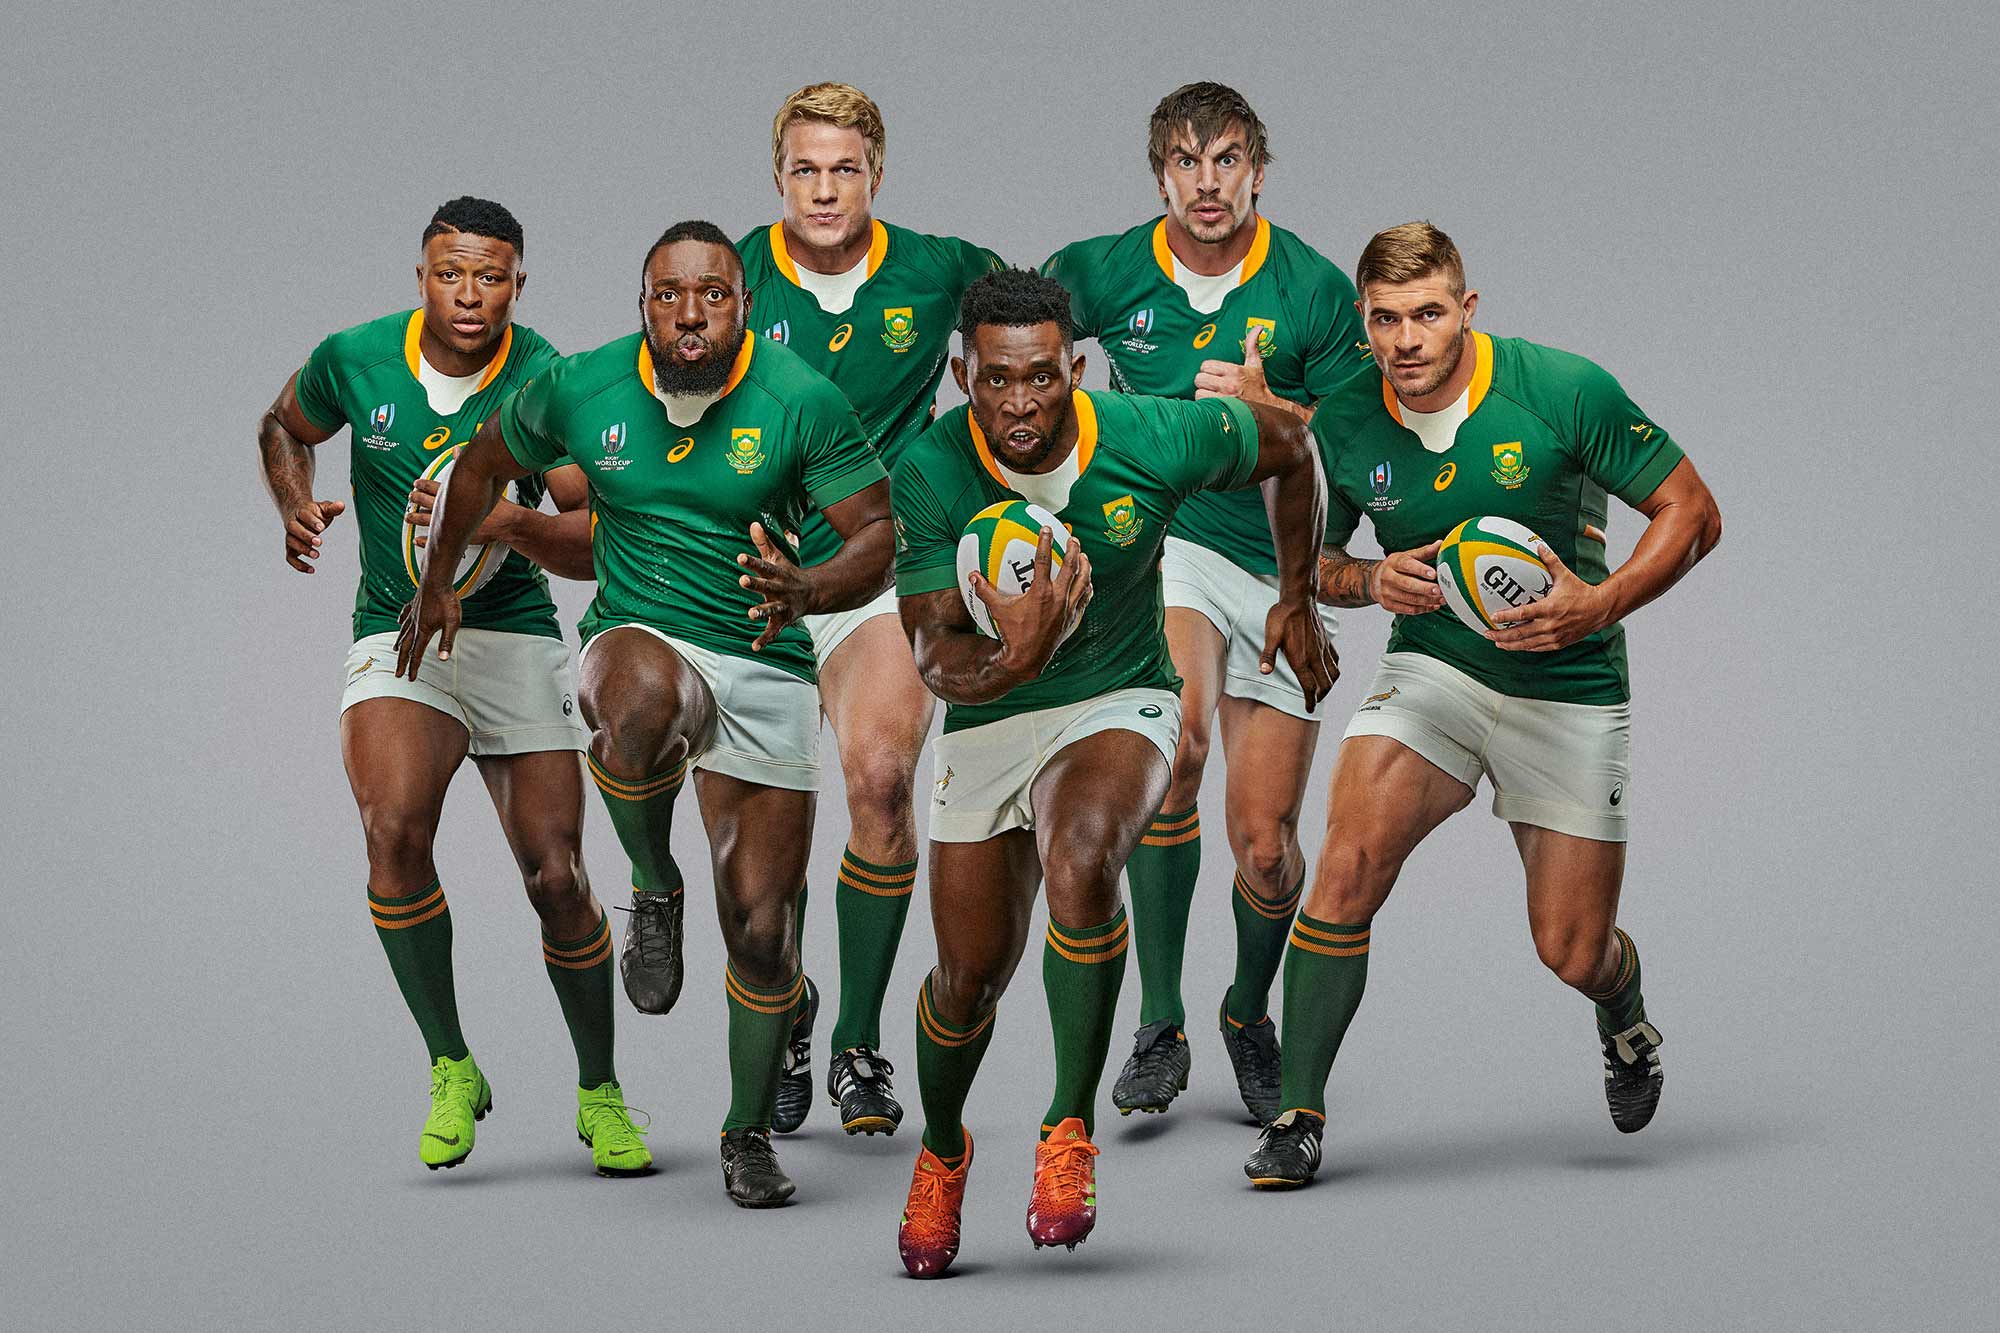 rugby world cup champions the south african springboks pose their photographic campaign ahead of Japan 2019